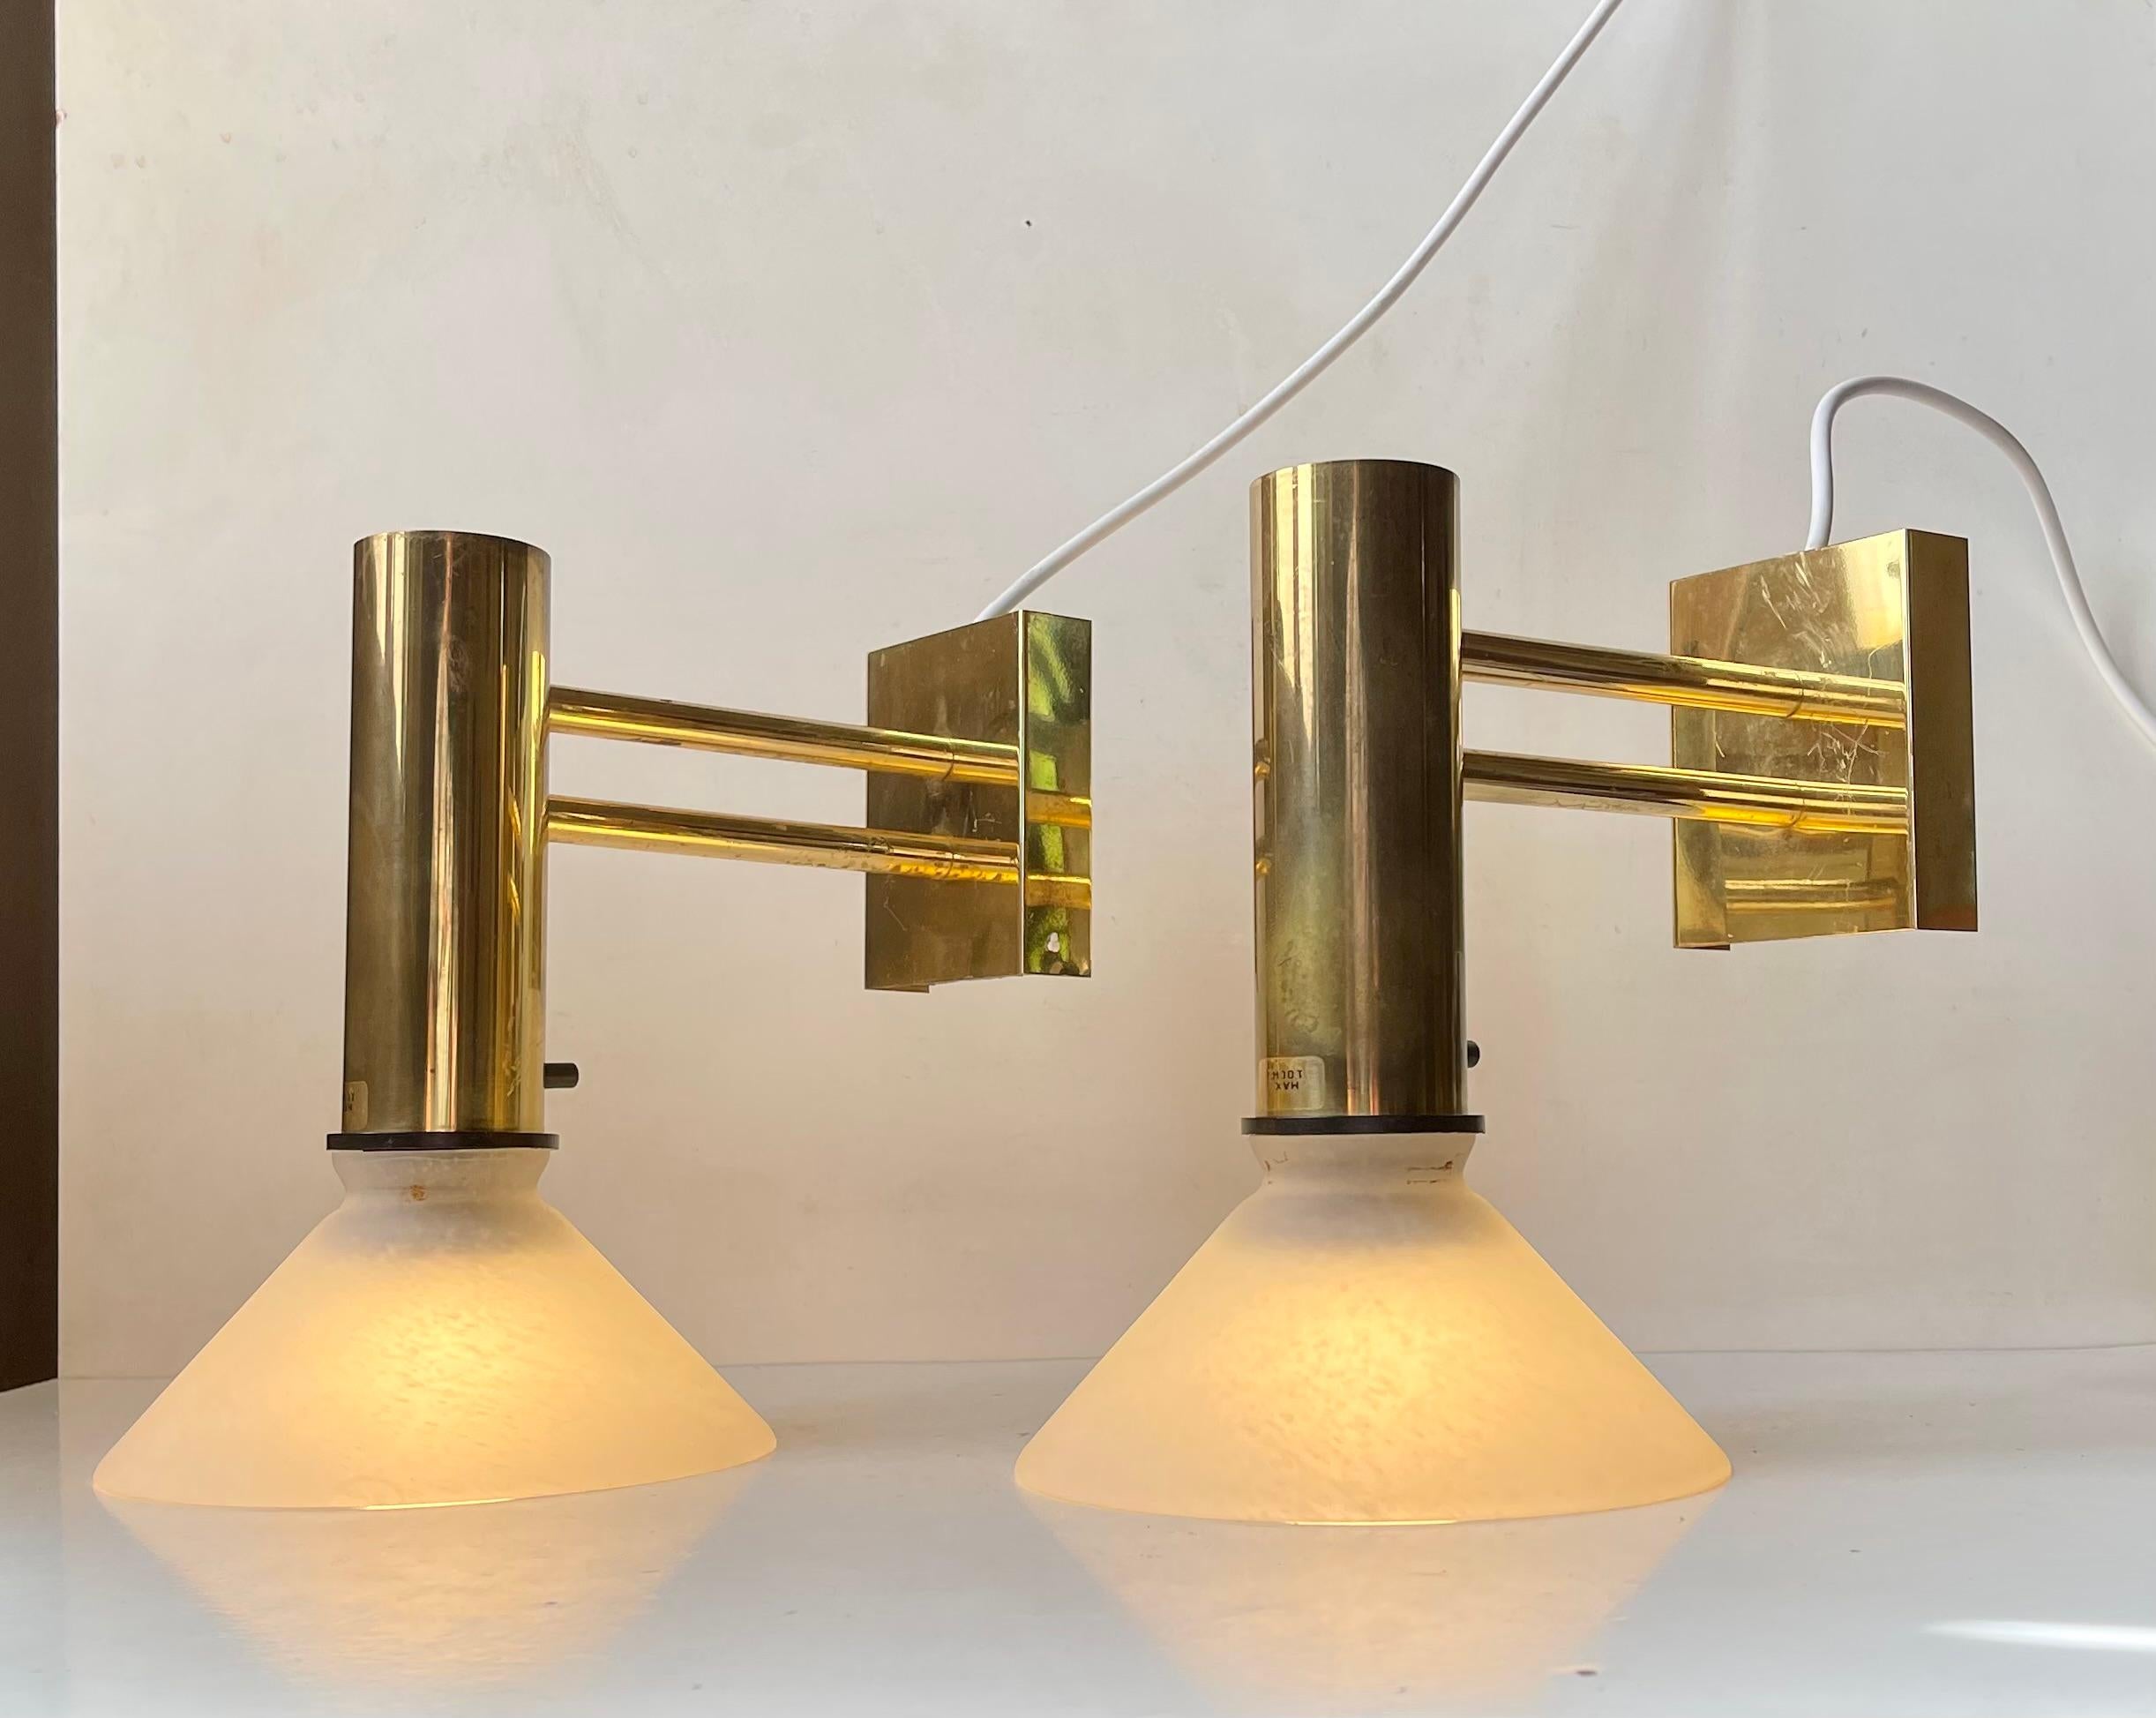 Vintage Nautical Norwegian Navy Brass Wall Sconces, 1970s In Good Condition For Sale In Esbjerg, DK